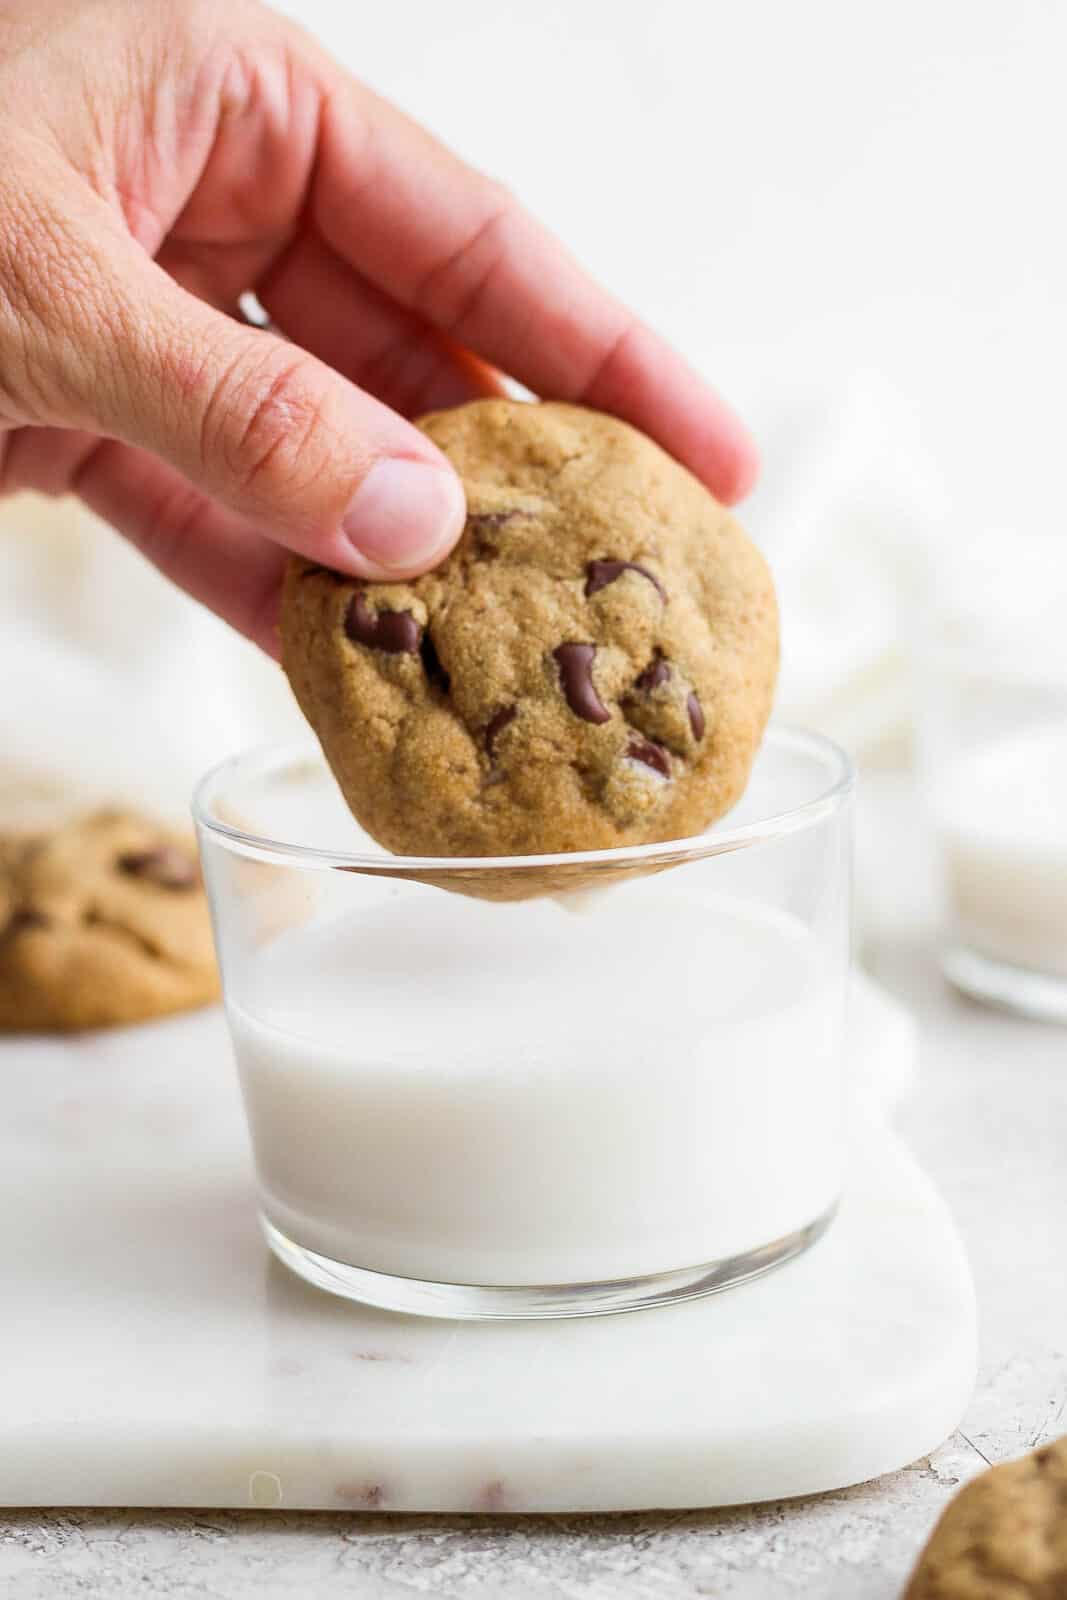 A paleo chocolate chip cookie being dipped into a glass of milk.